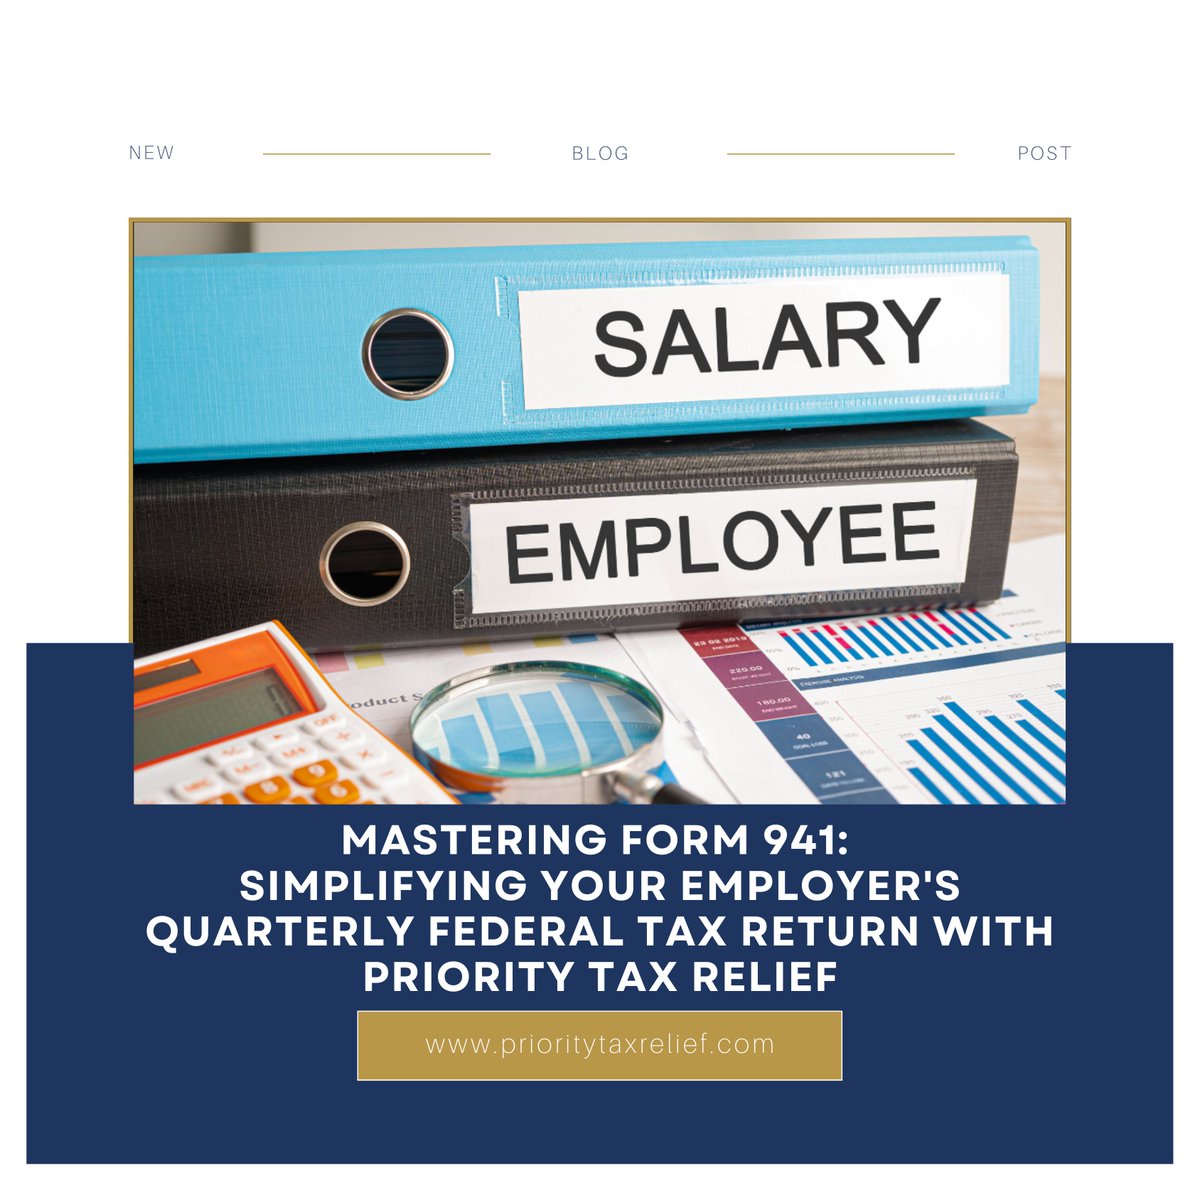 Stay in control of your employer tax obligations! 

Visit prioritytaxrelief.com/mastering-form… to read more about Mastering Form 941 and ensure a smooth tax filing experience for your business! 🌐📚💼

#PriorityTaxRelief #Form941 #EmployerTaxReturn #QuarterlyTax #TaxObligations #TaxCompliance